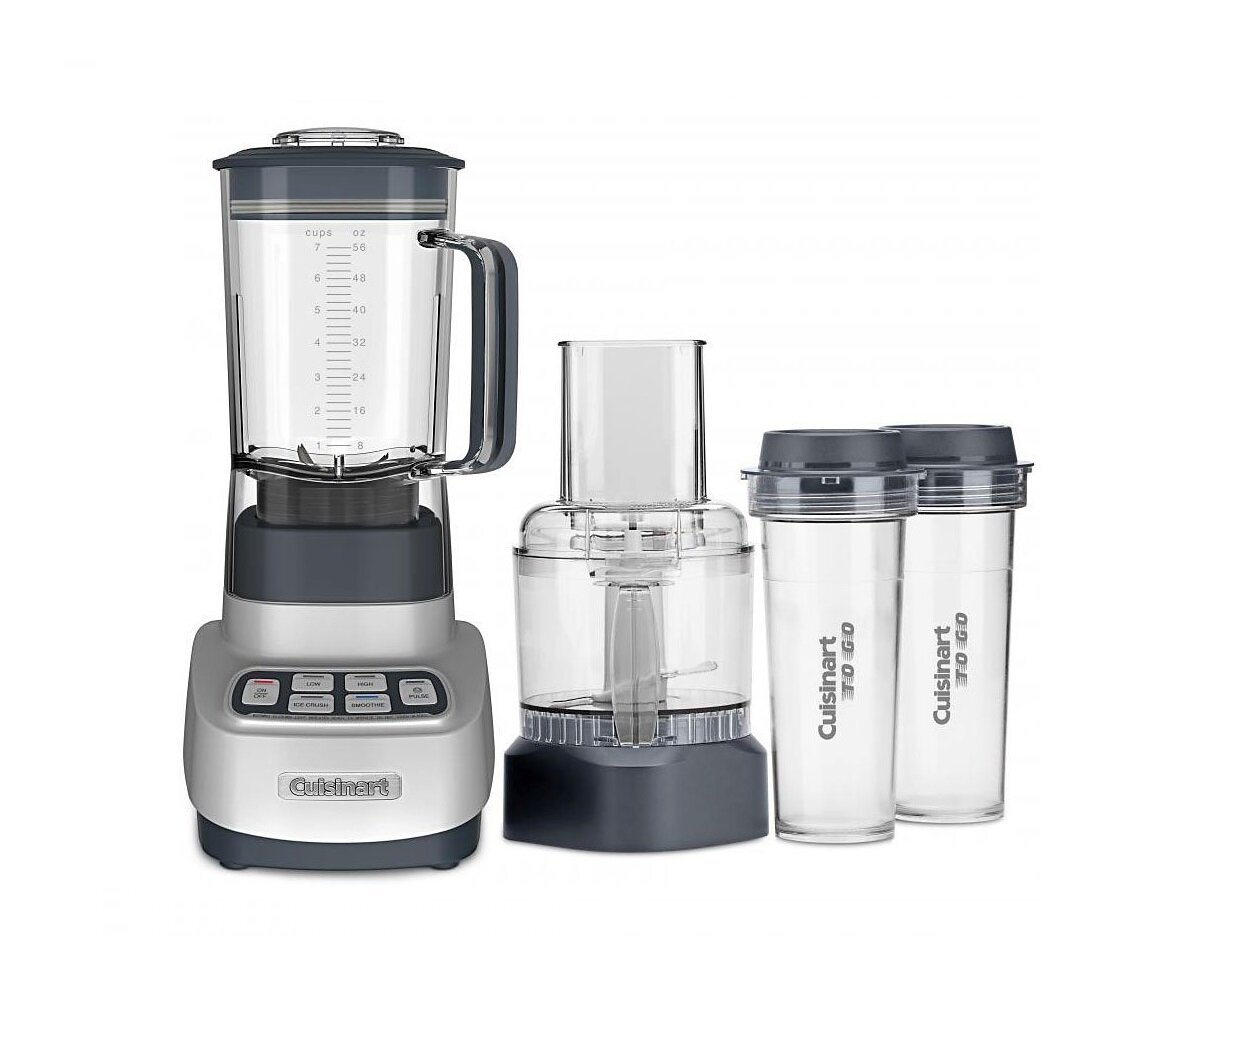 NutriBullet Blender Combo Bundle with 20oz Cup, 24oz Cup and